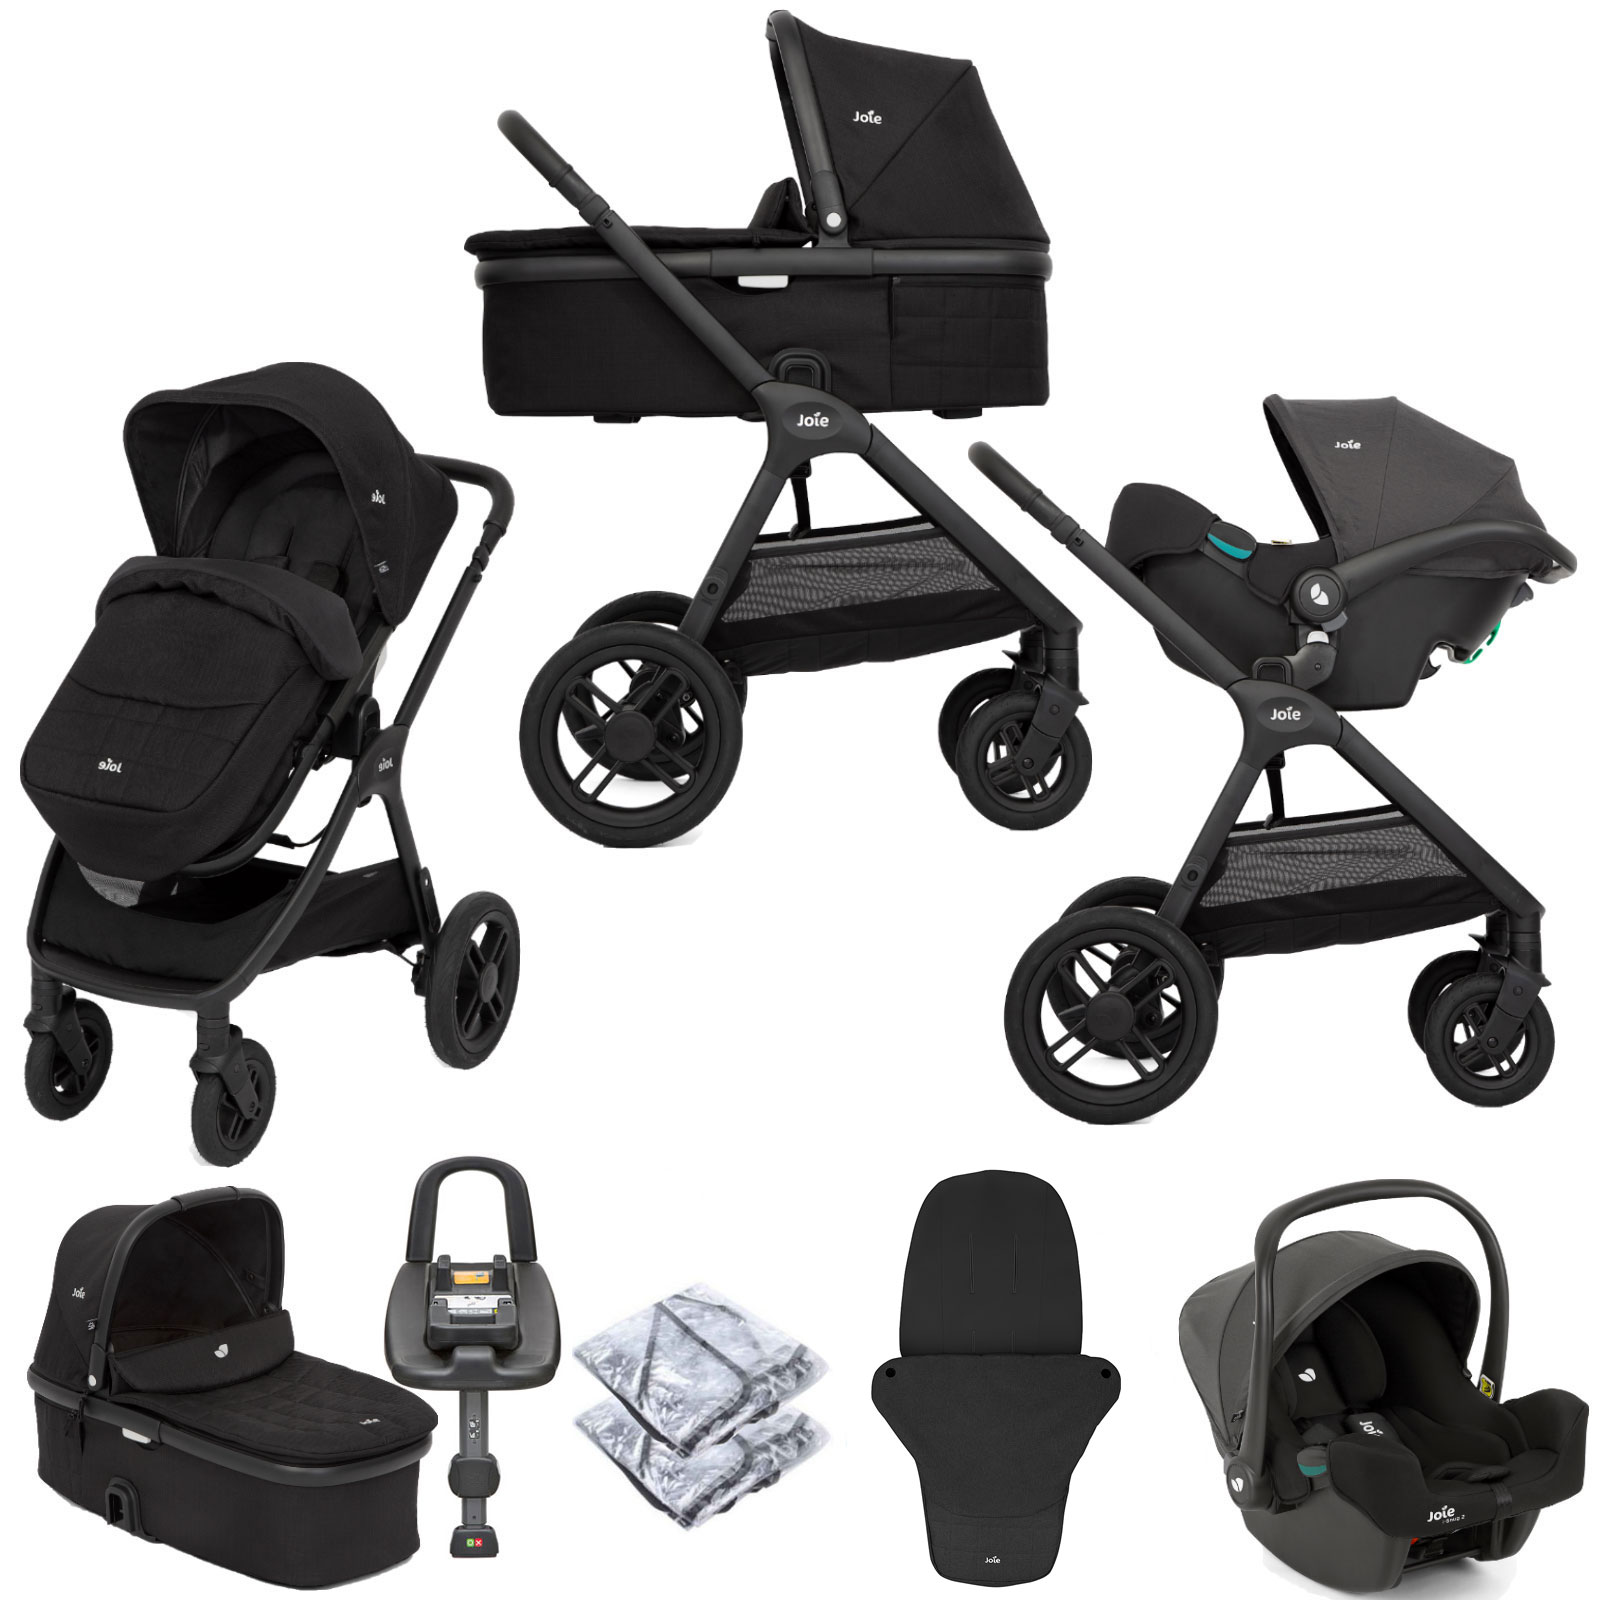 Joie Honour Pushchair Travel System with Carrycot & i-Base Advance ISOFIX Base - Shale